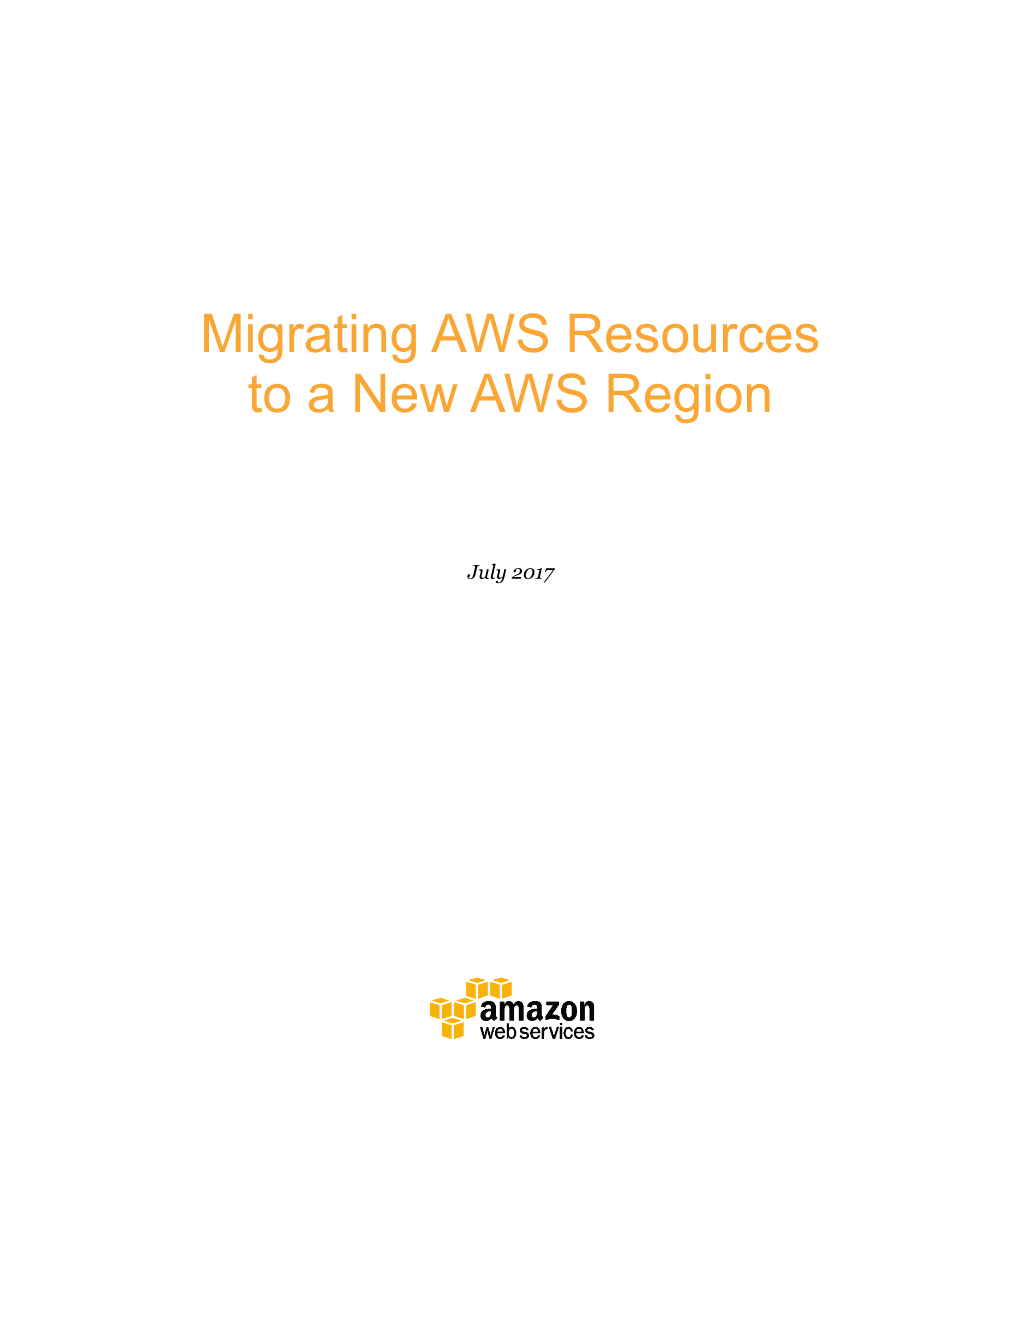 Migrating AWS Resources to a New AWS Region